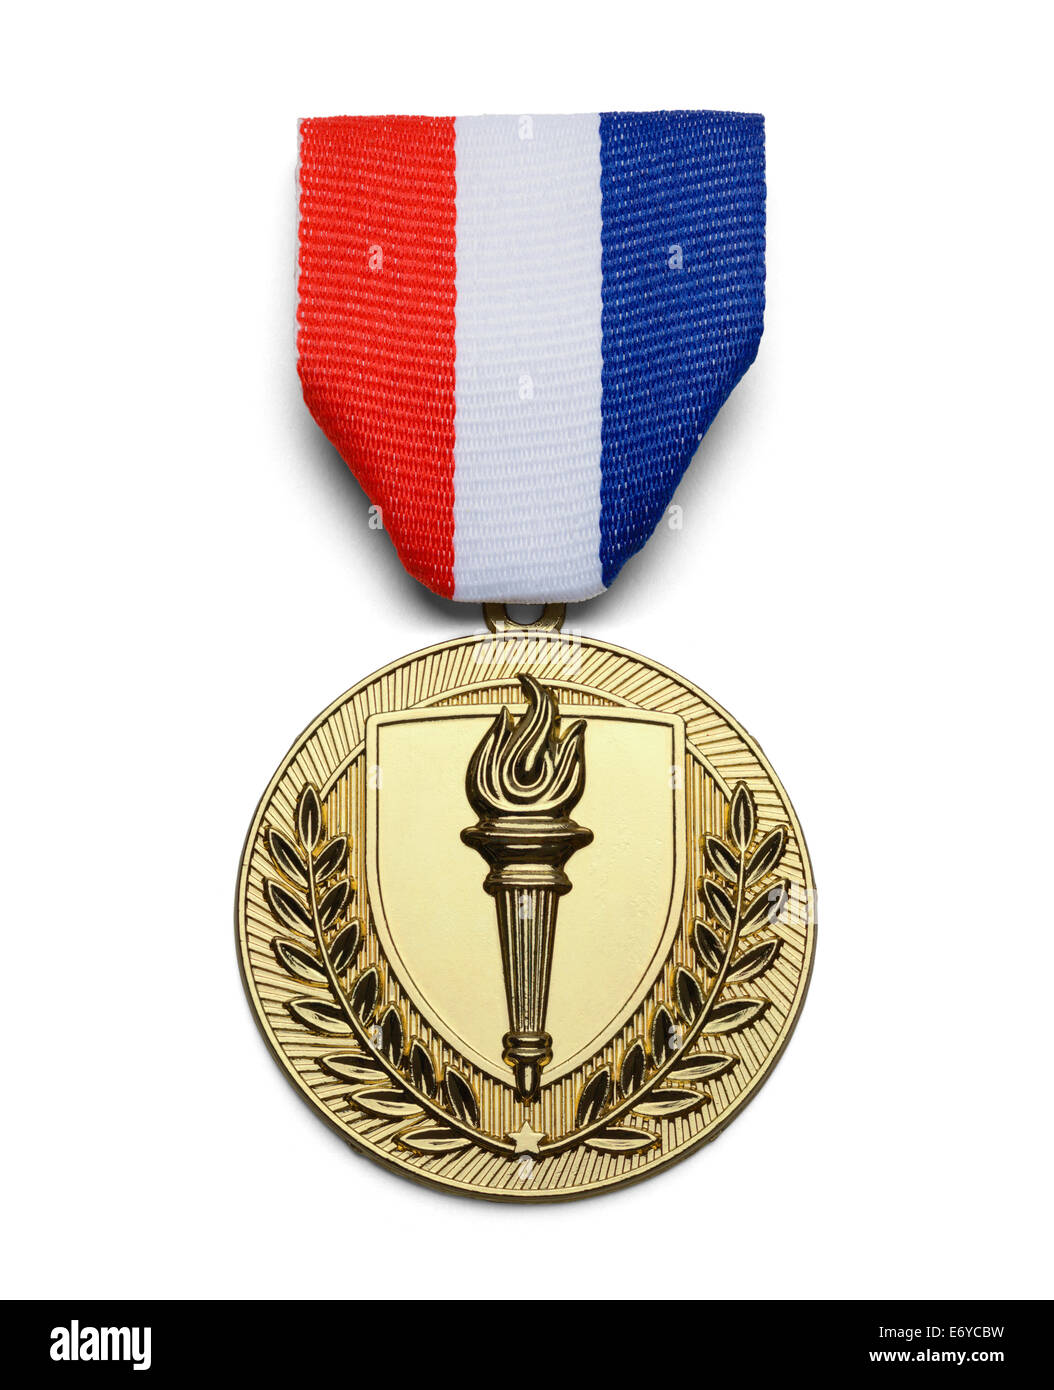 Gold USA Torch Medal Isolated on White Background. Stock Photo